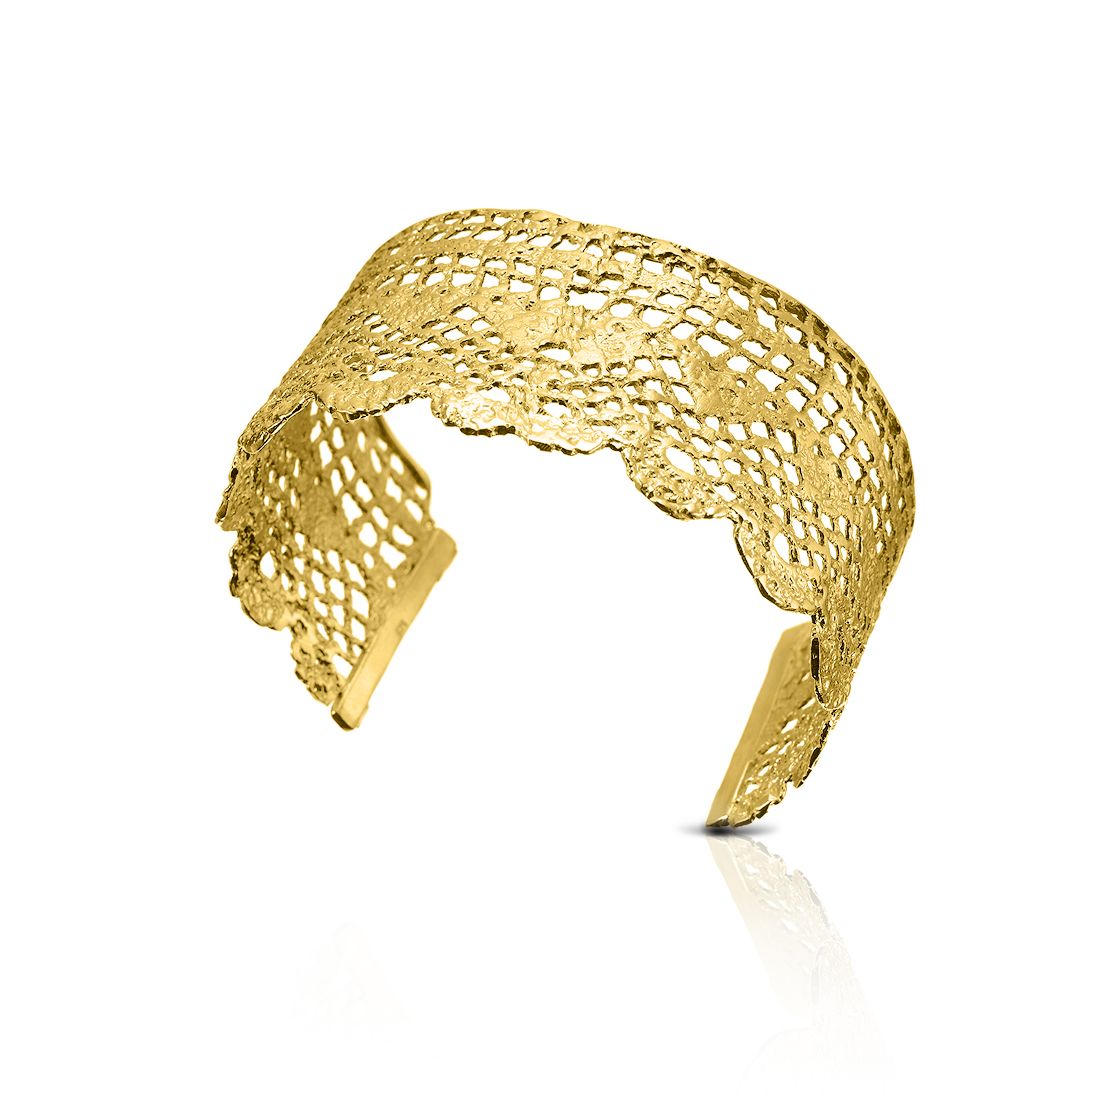 A charming gold-plated lace wide-cuff bracelet is a delicate addition for your special day.